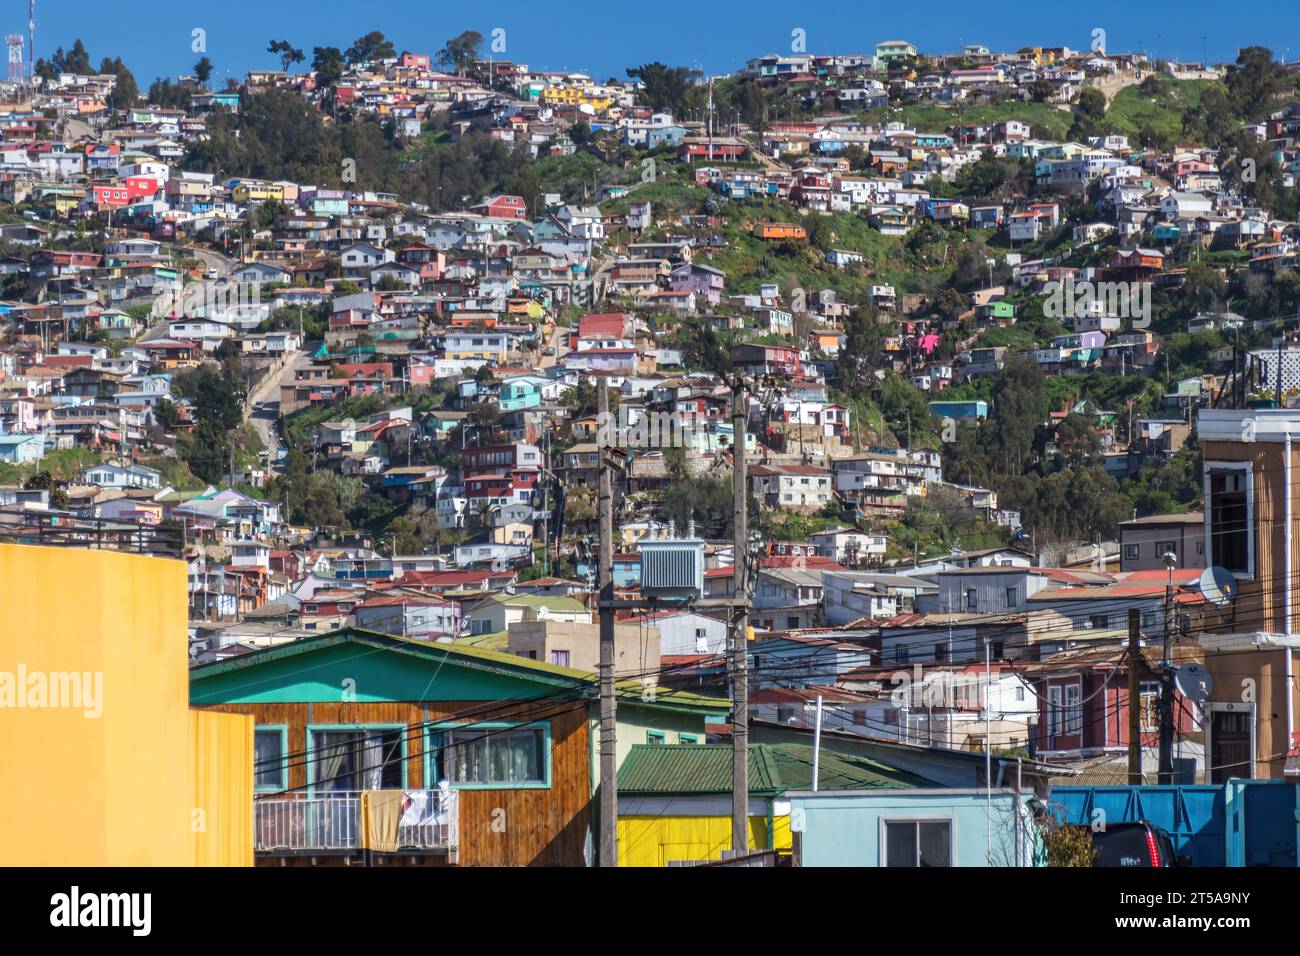 Colourful cityscape of houses in Valparaiso, Chile. The buildings are crammed together and sprawl up the hillside in the winter sun. Stock Photo